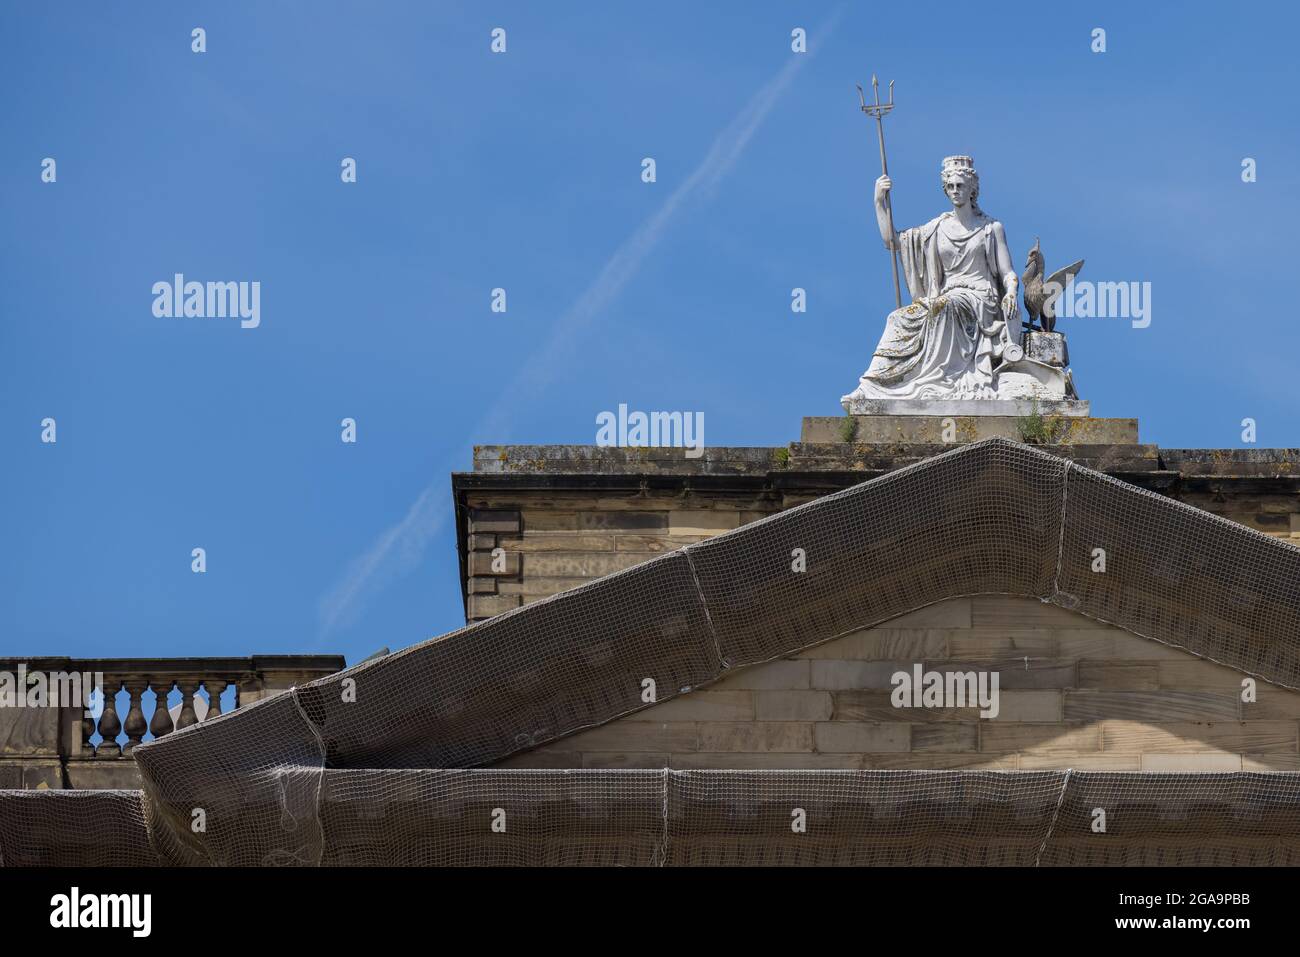 LIVERPOOL, UK - JULY 14 : Statue of Britannia and a Liver Bird on top of the Walker Art Gallery, Liverpool, Merseyside, England, UK on July 14, 2021 Stock Photo